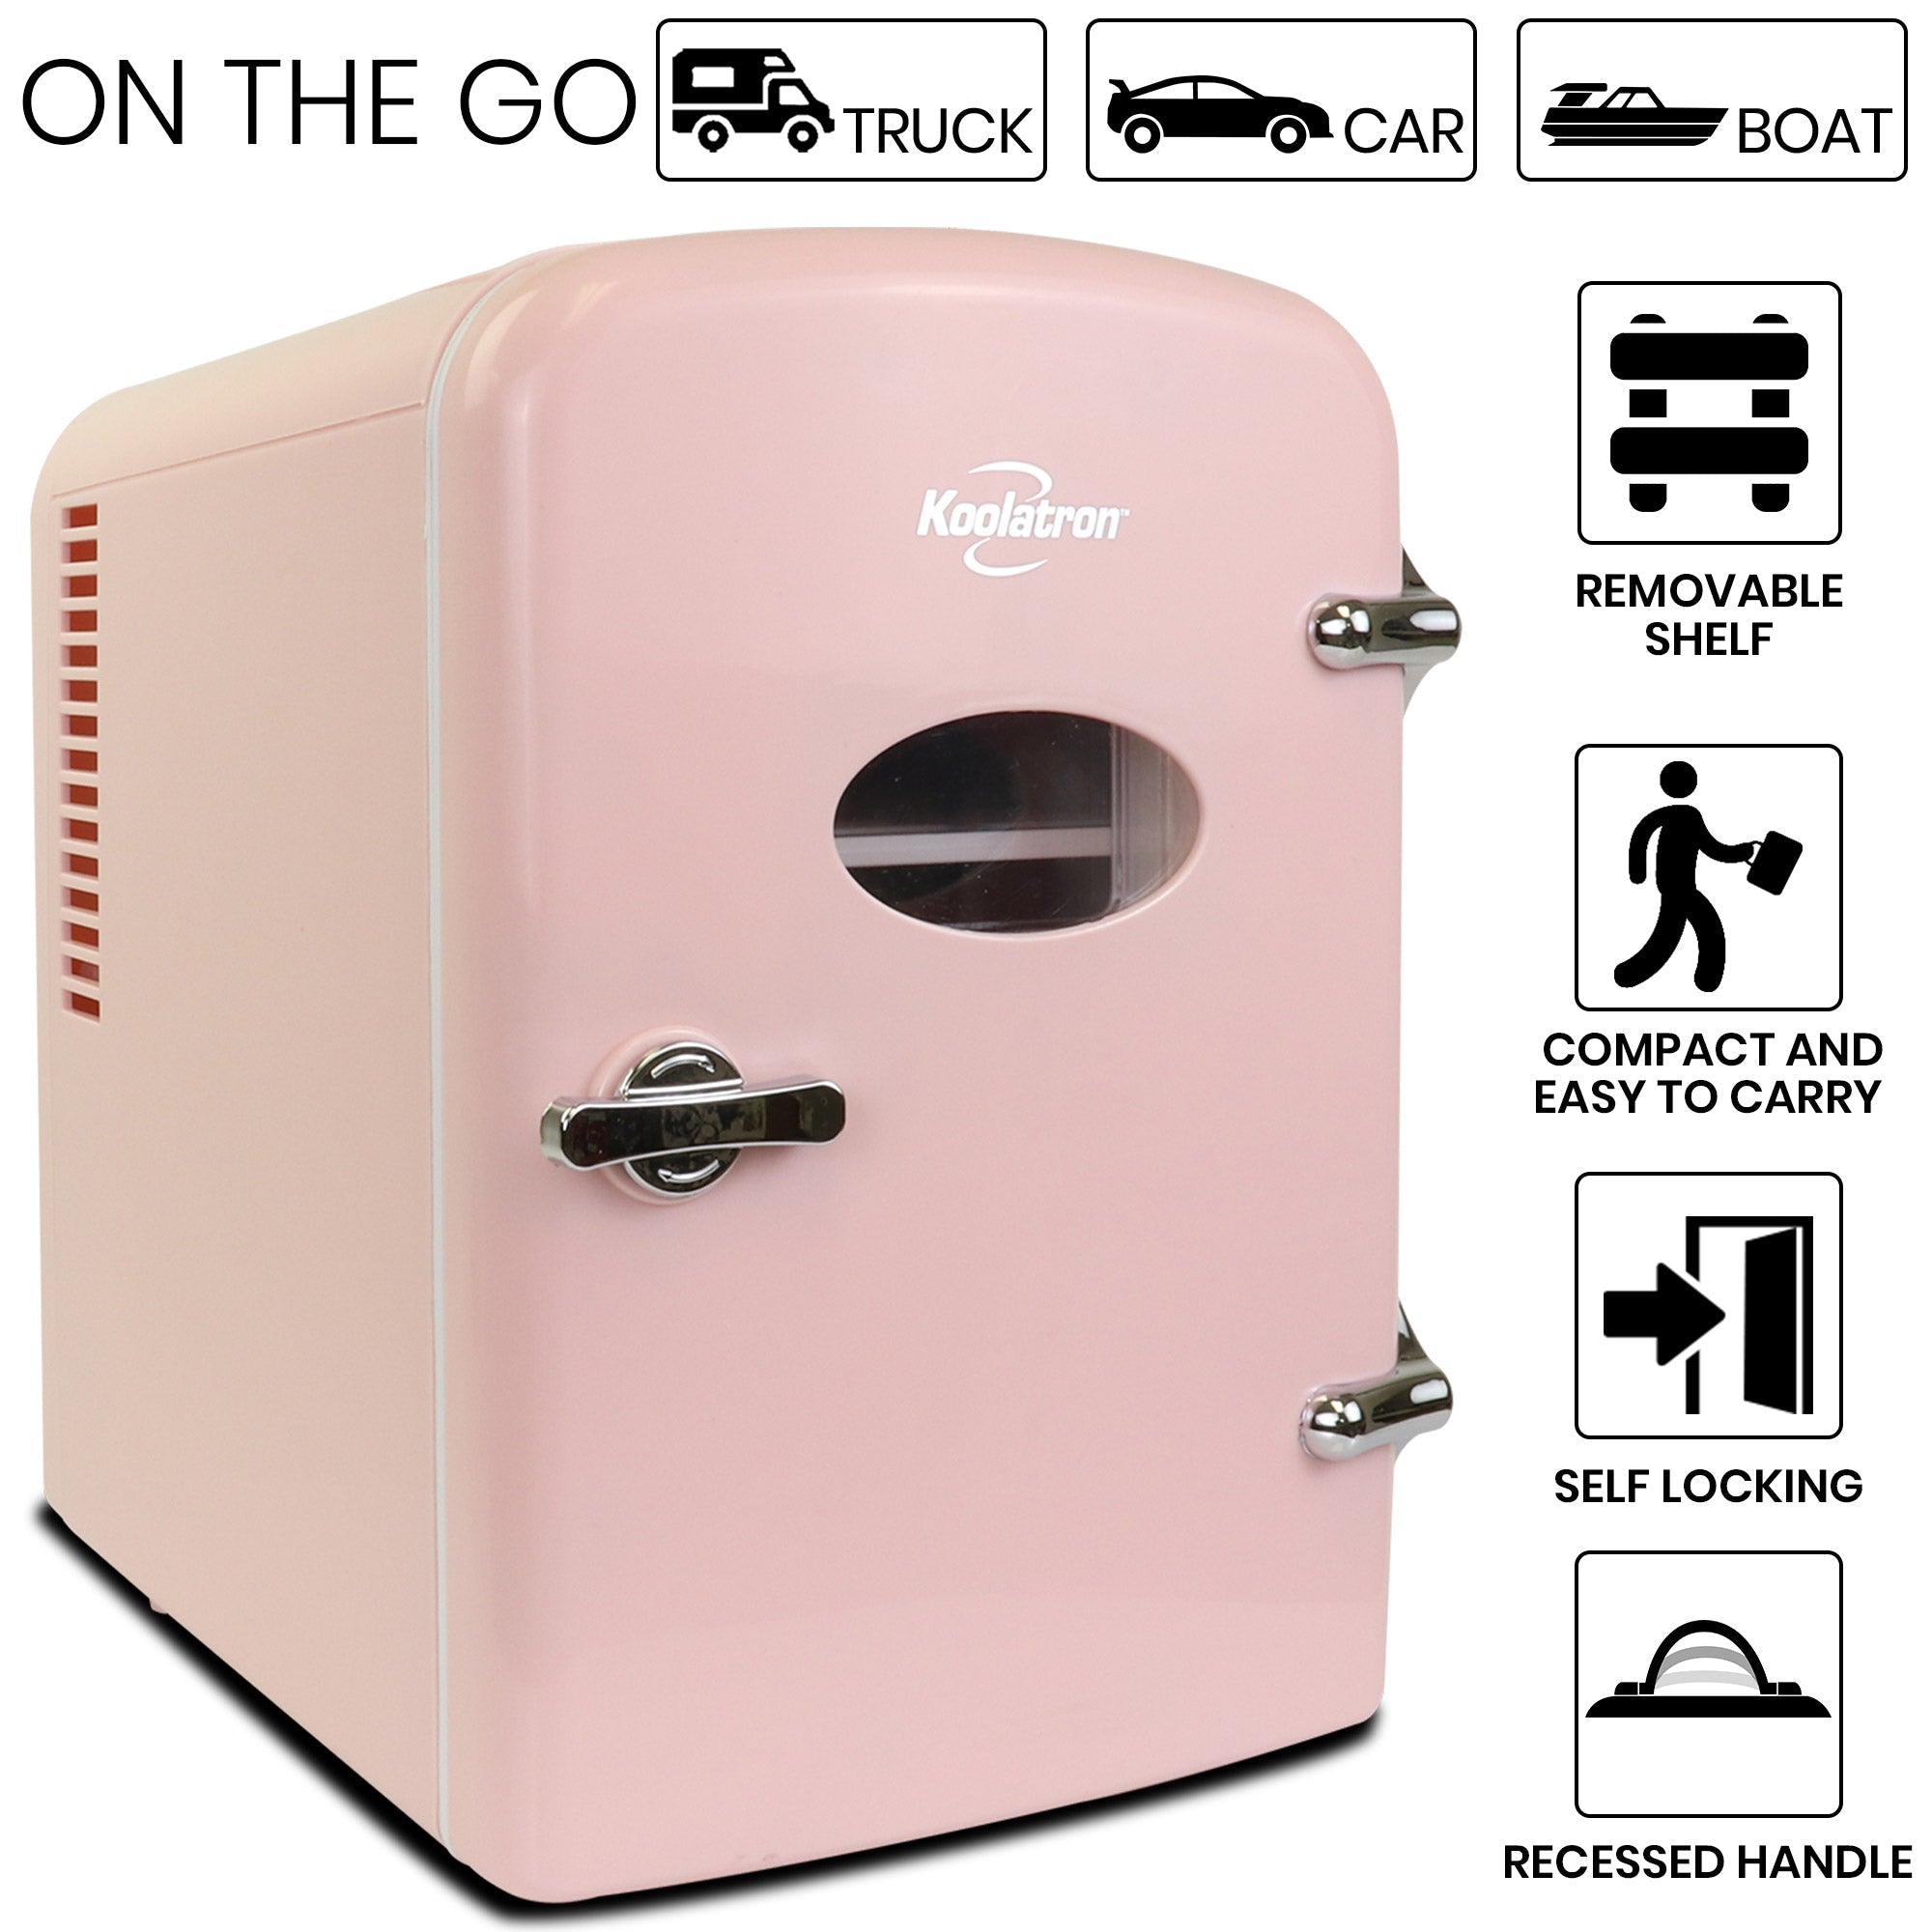 Product shot of Koolatron retro 6 can mini fridge on a white background. Text and icons above describe: On the go - truck car boat. Text and icons to the right describe: Removable shelf; compact and easy to carry; self-locking; recessed handle